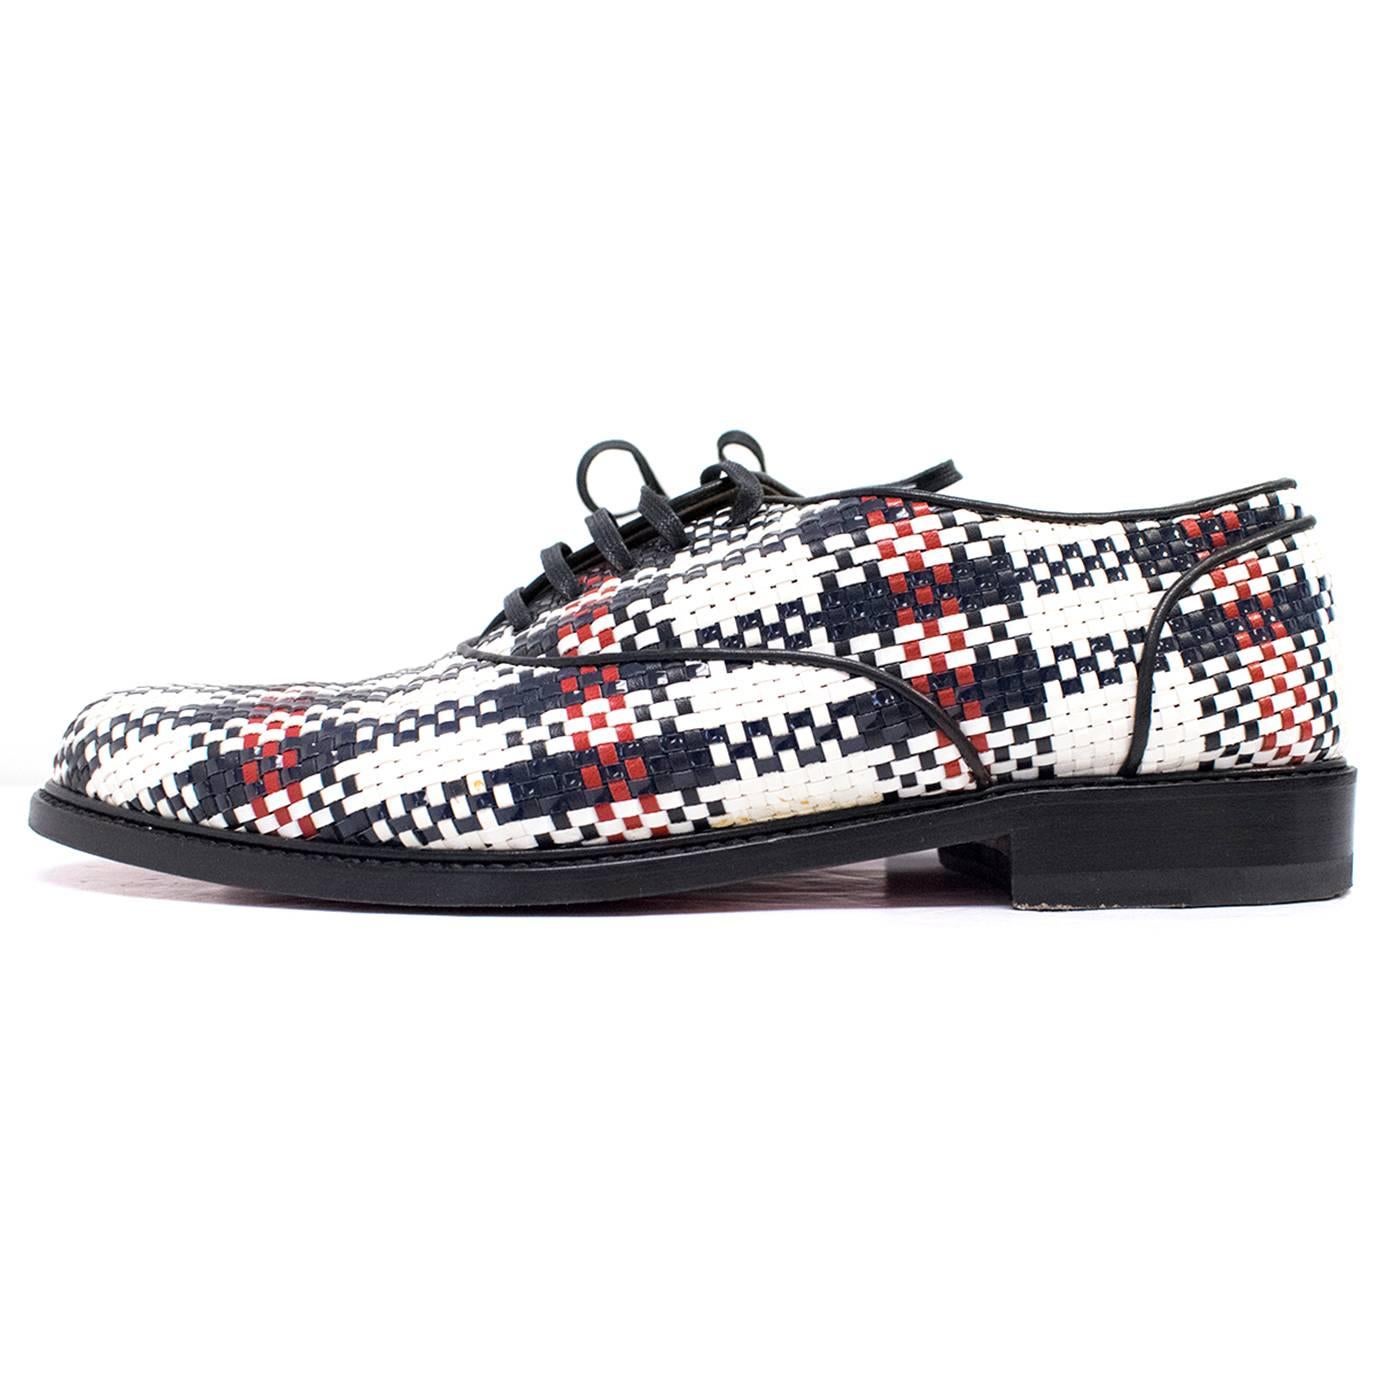 Christian Louboutin woven leather derby brogues. Features check woven leather pattern in tones of black, white and red, a round toe, lace up fronts, stacked black sole and signature Christian Louboutin red soles. 

There are signs of wear to the